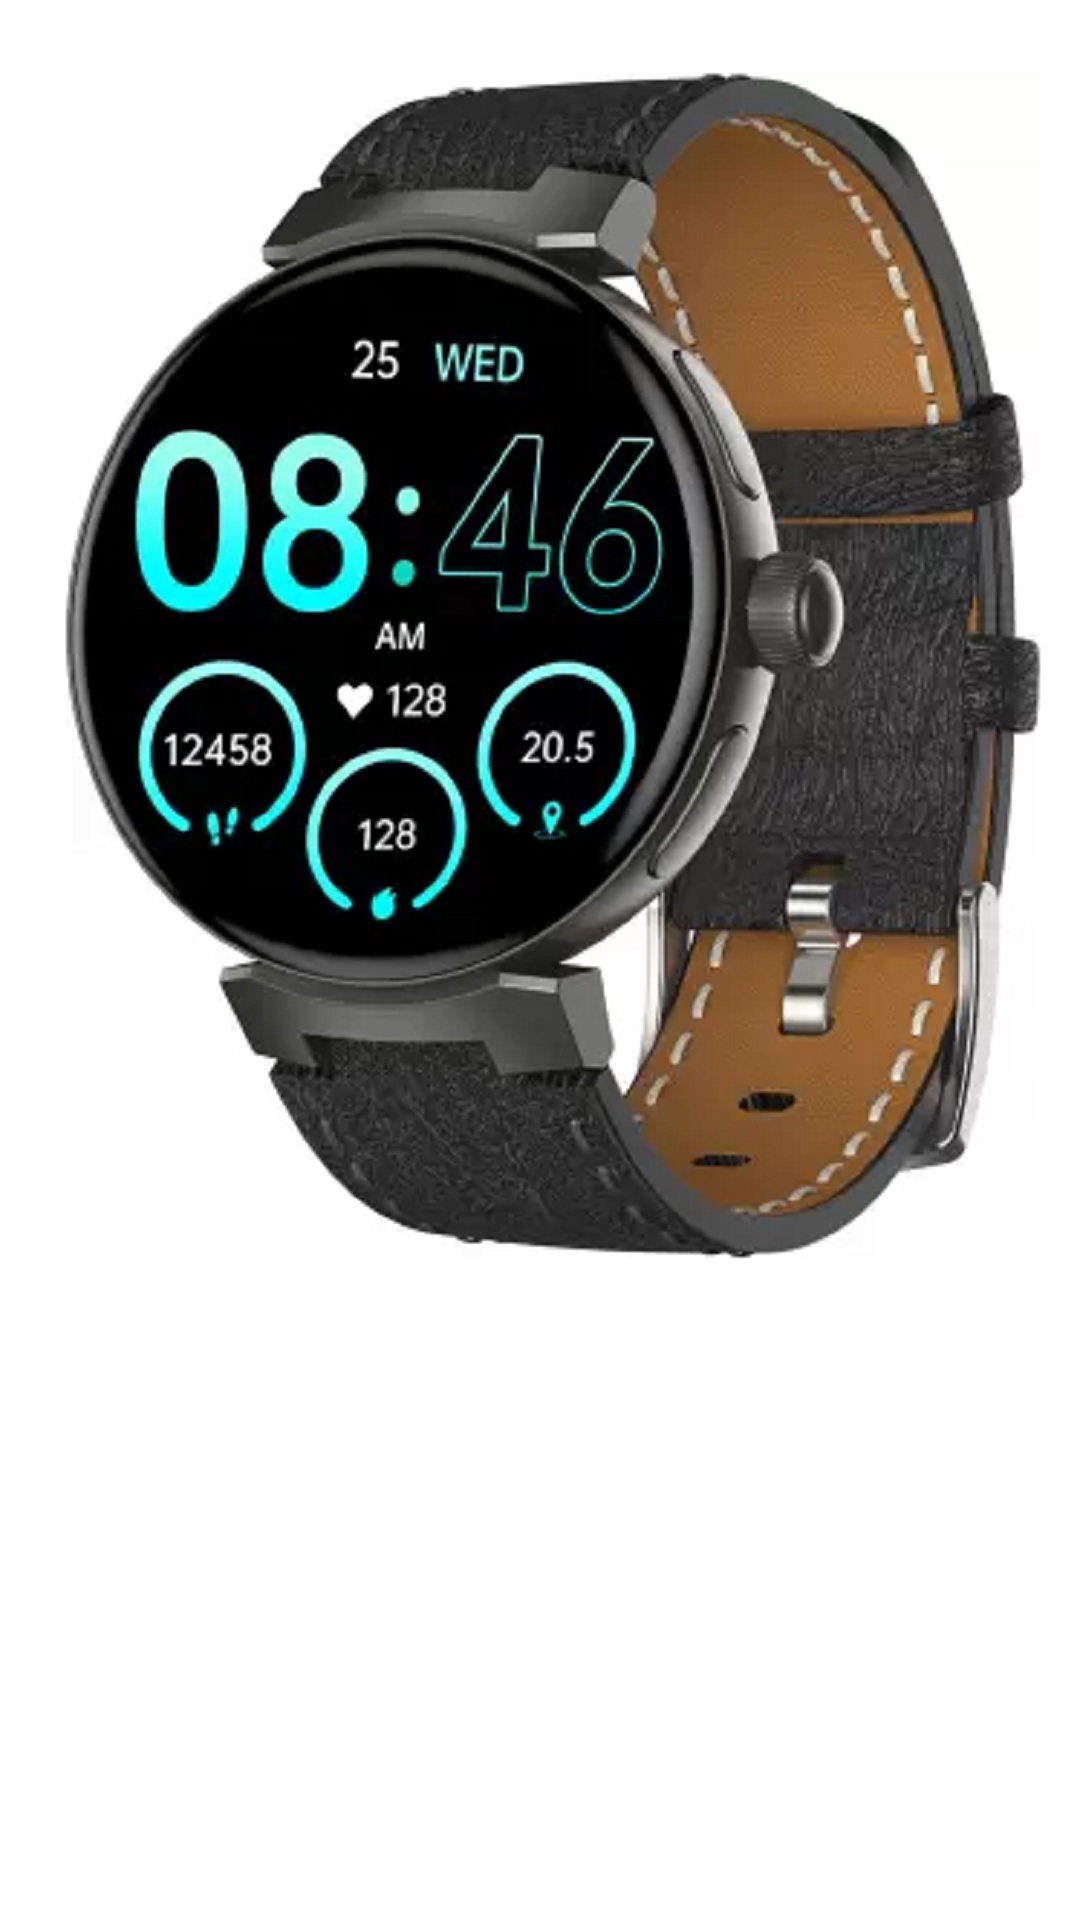 Gizmore Prime smartwatch: First-look 
